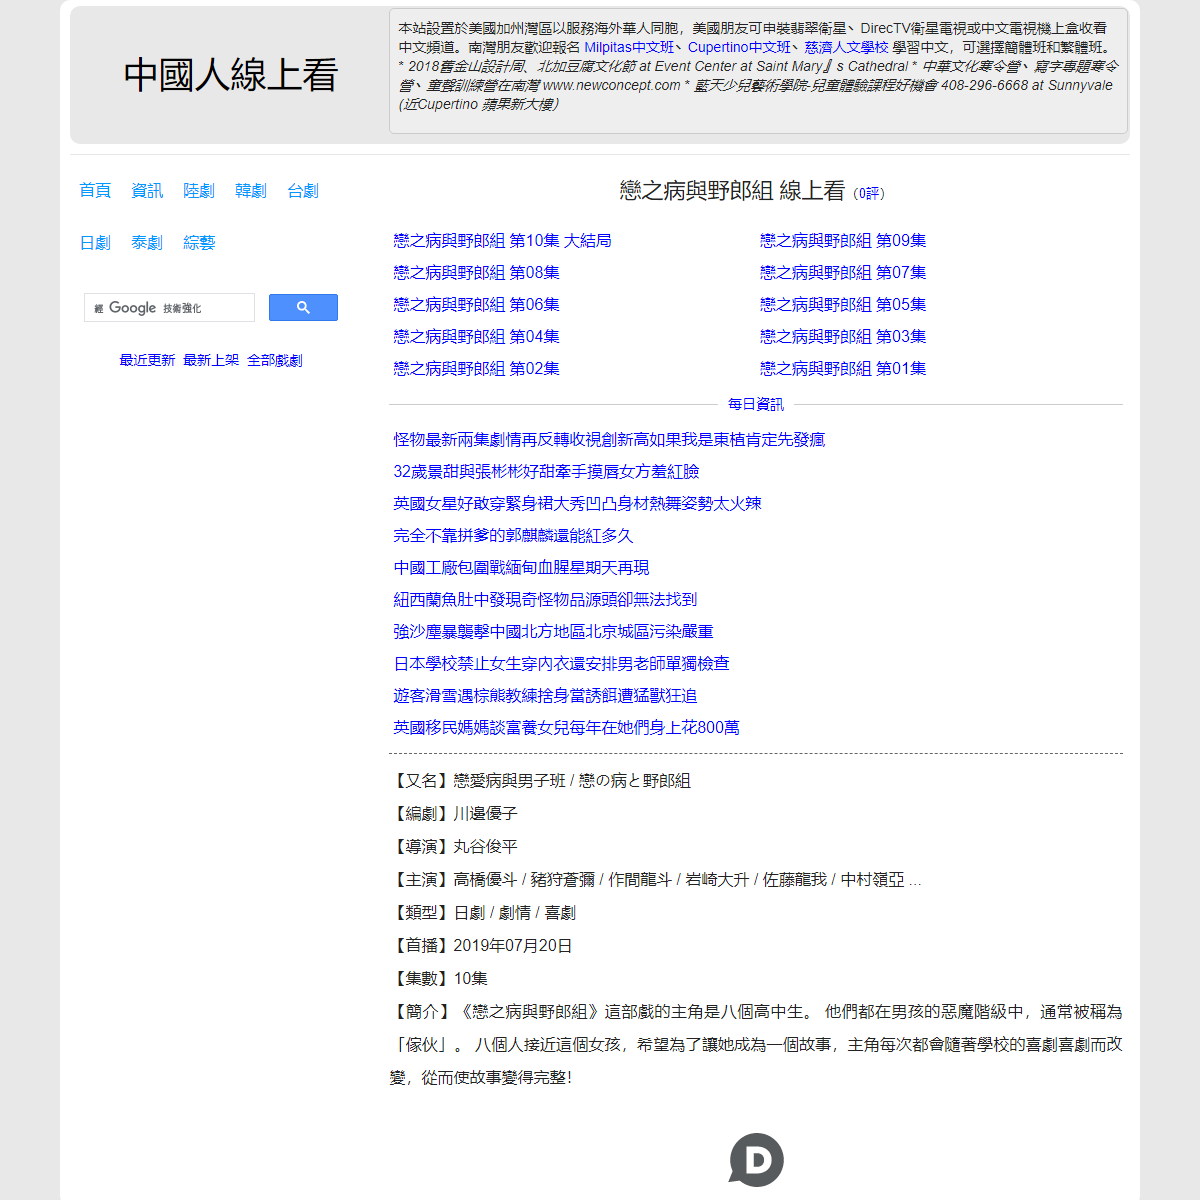 A complete backup of https://chinaq.tv/jp190720/